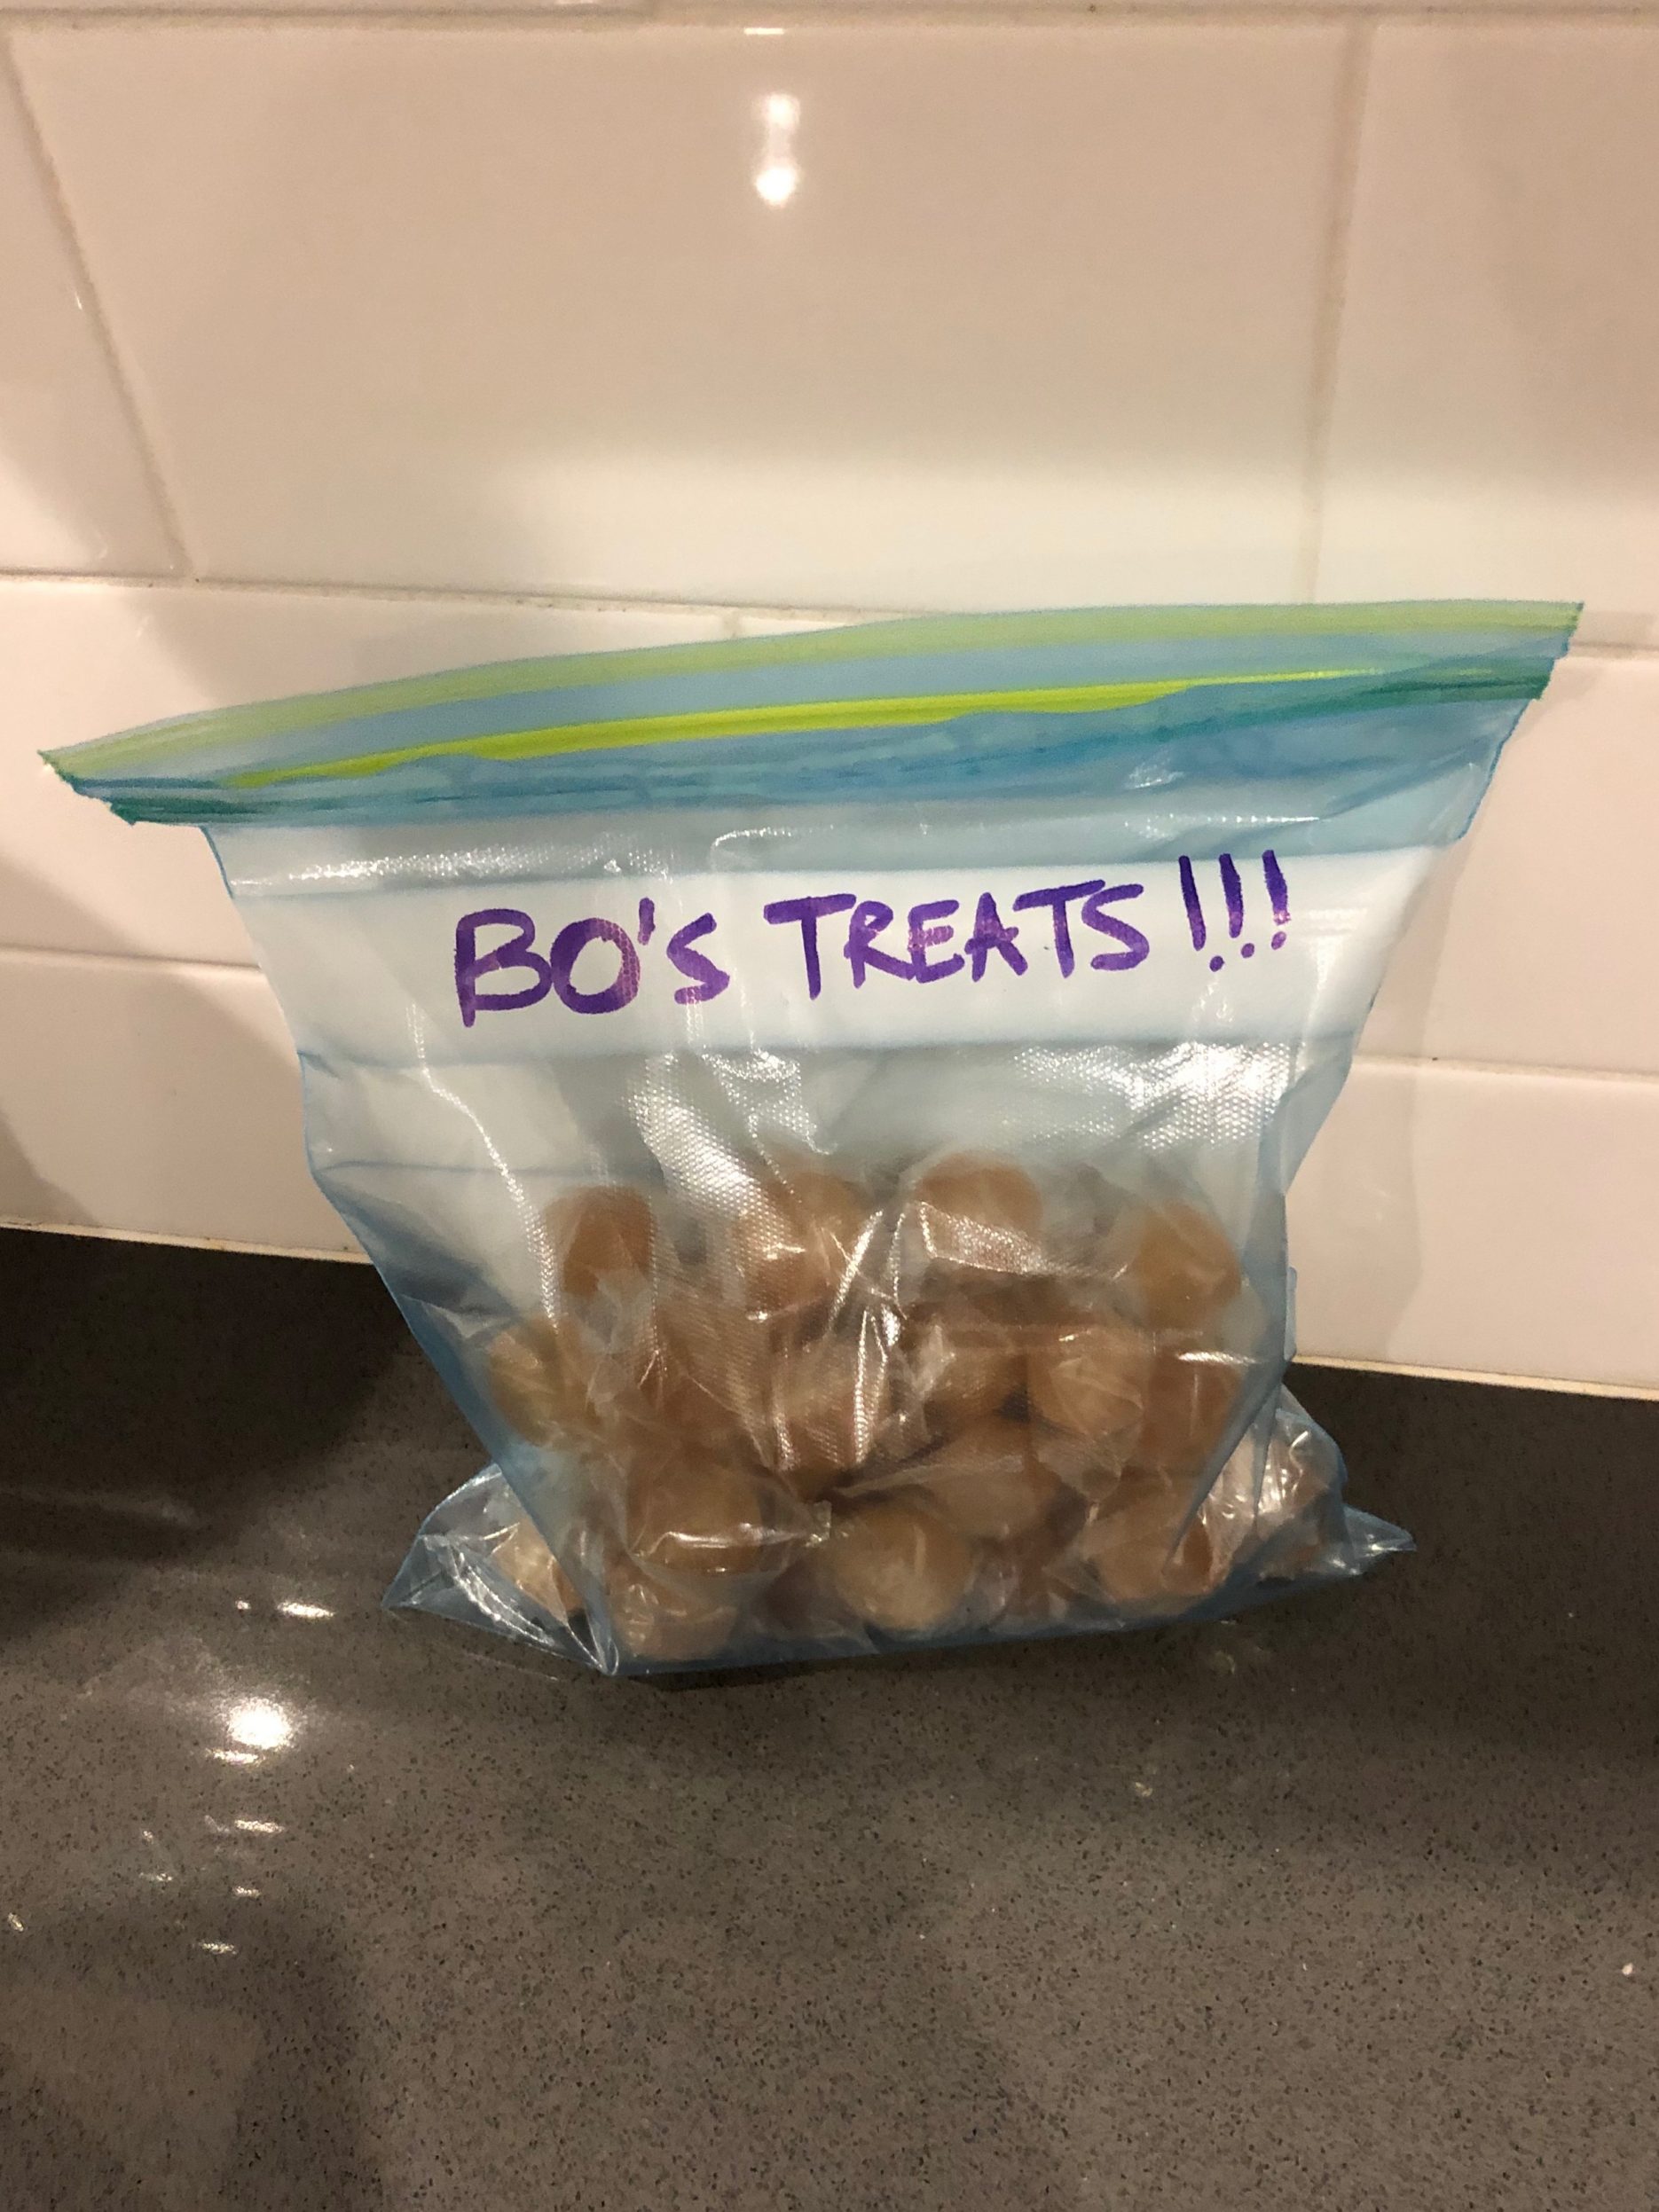 A Bag of Bo's Treats for Where the Cat Soundwalk